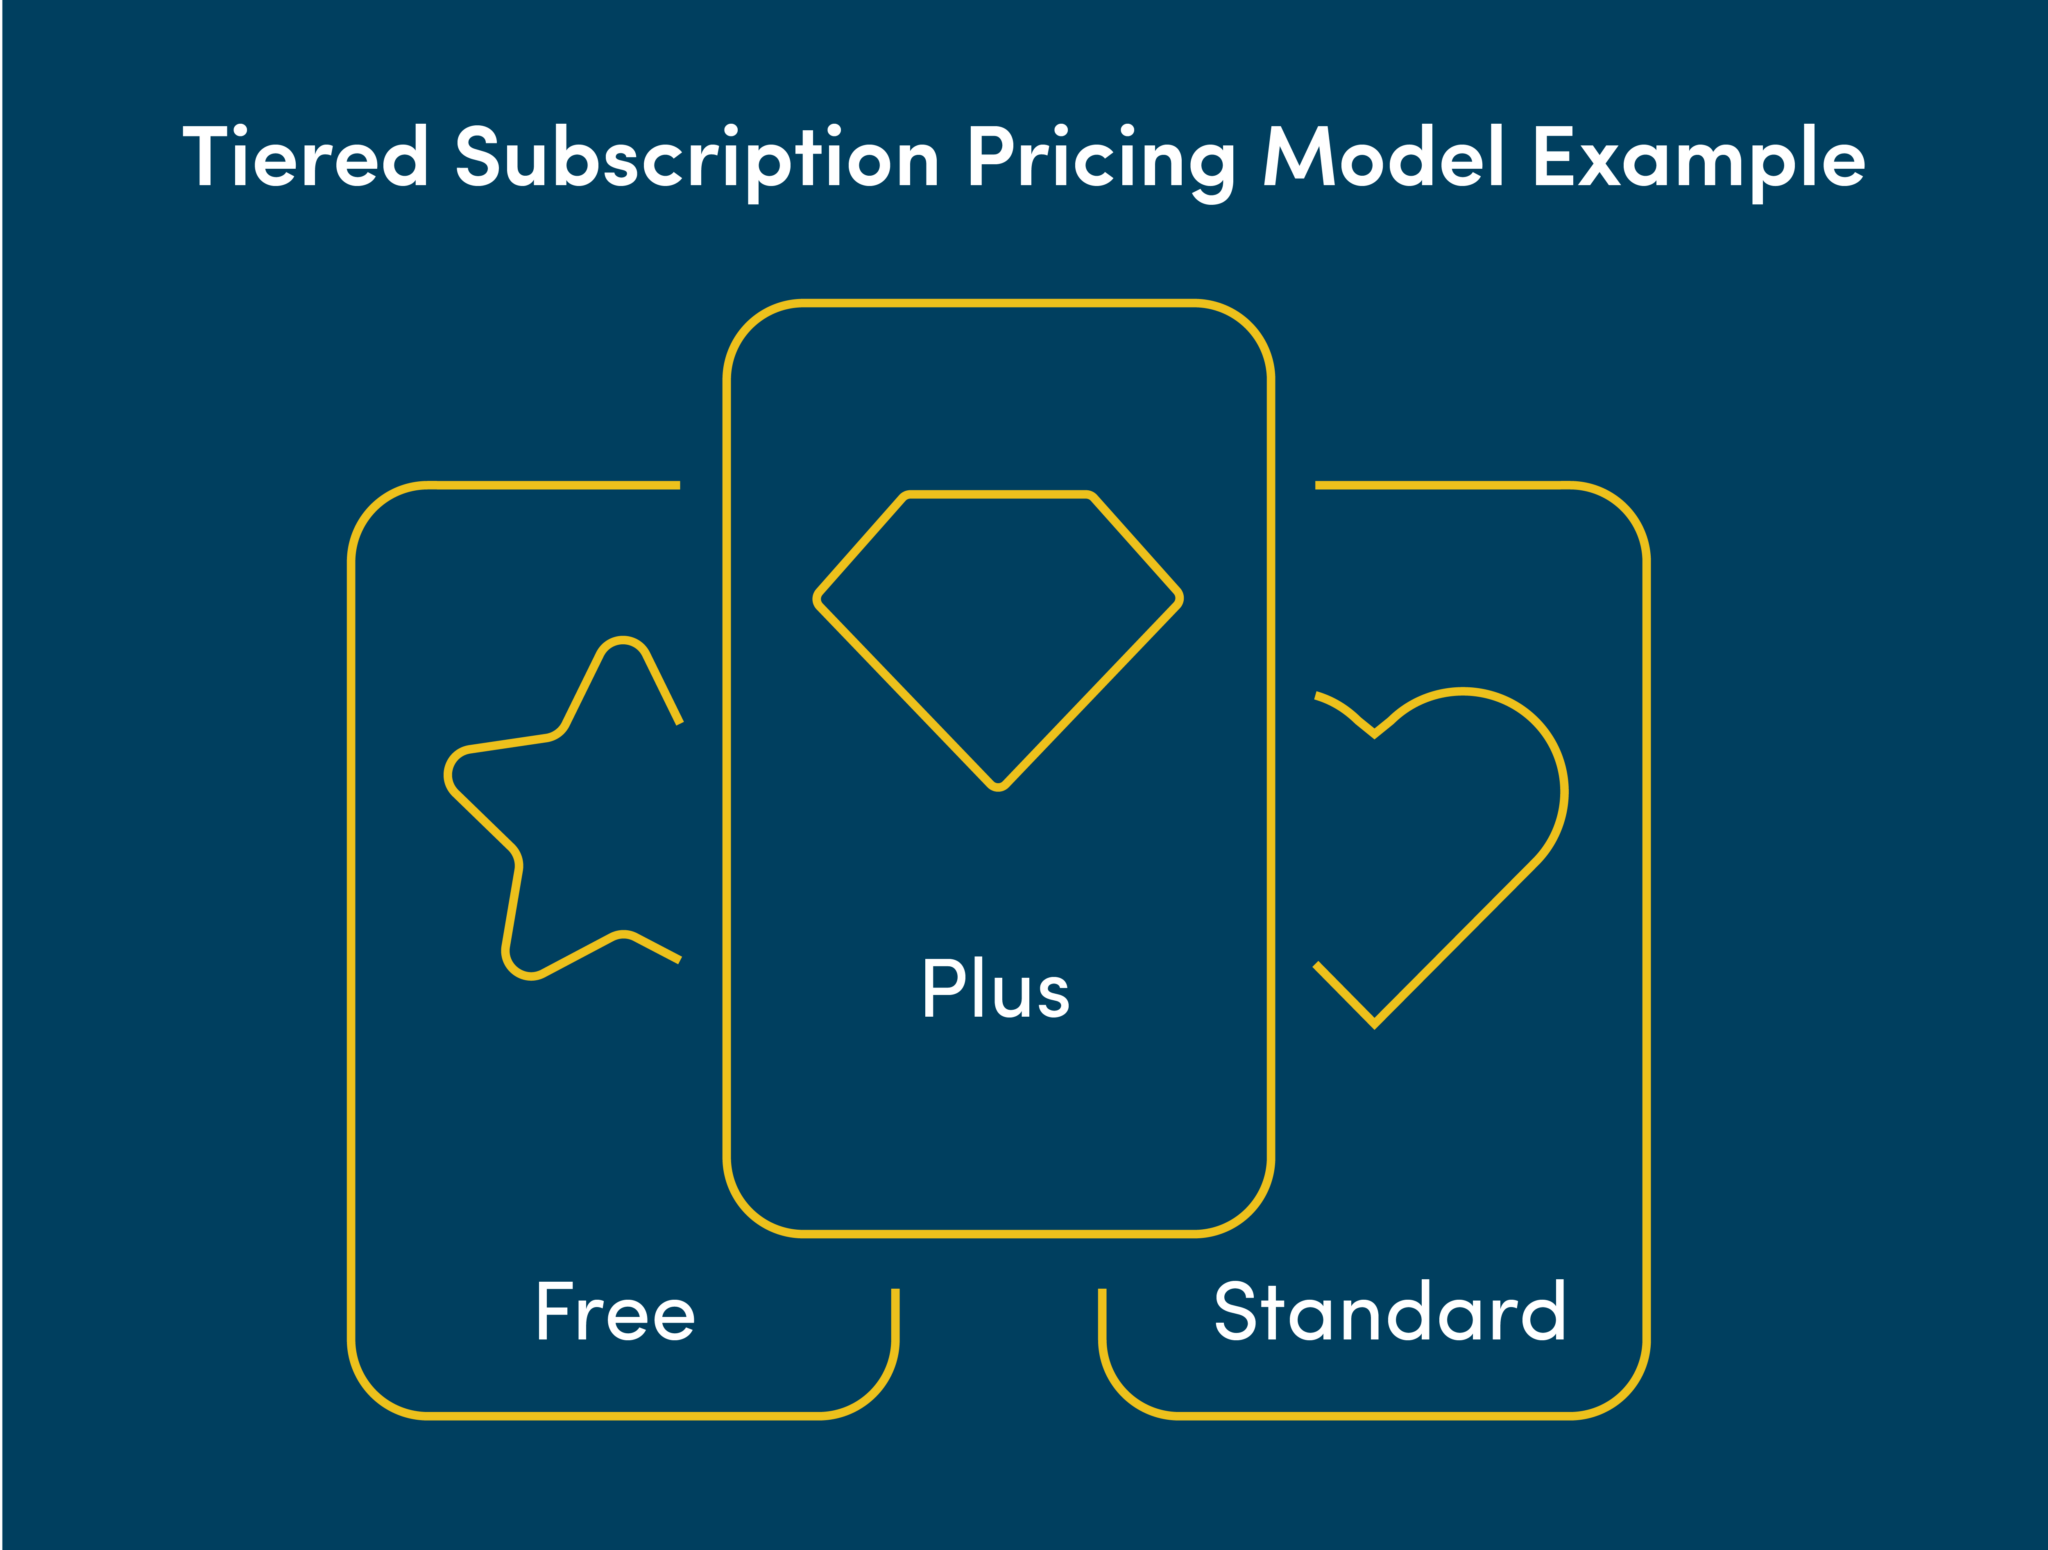 Tiered subscription pricing model example